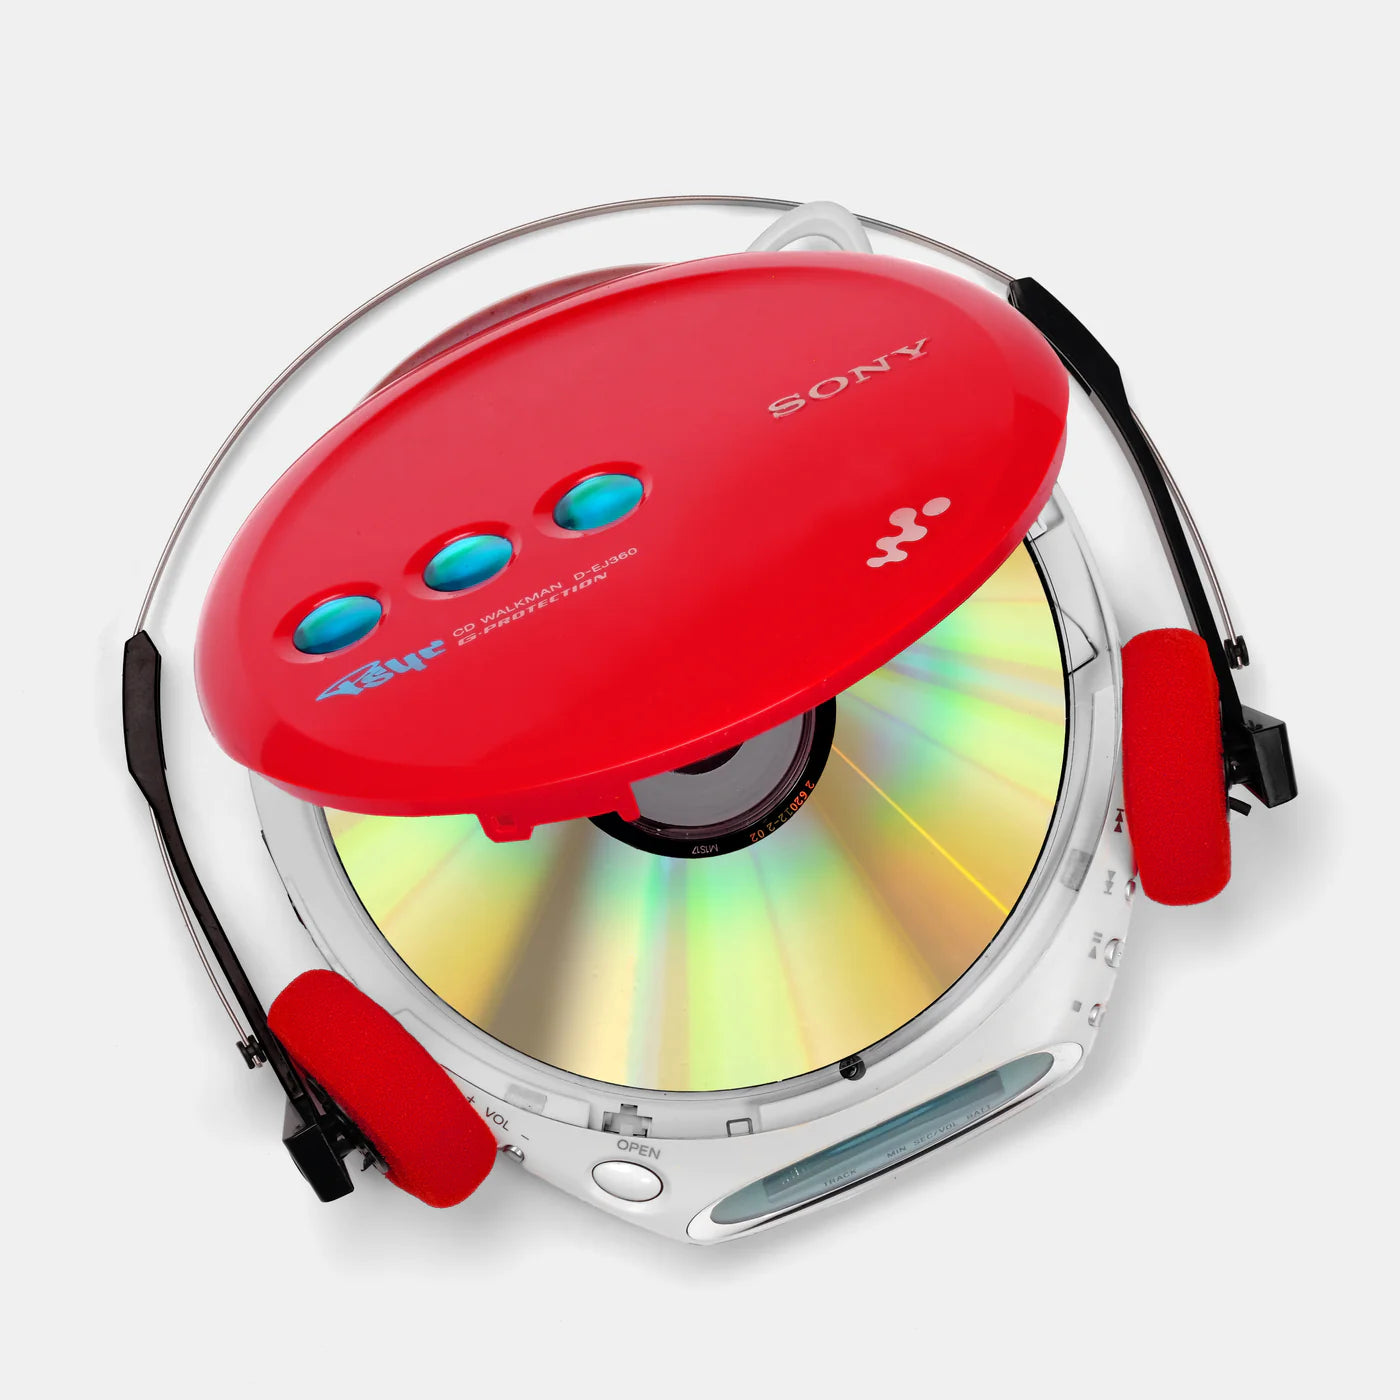 SONY PSYC D-EJ360 RED PORTABLE CD PLAYER